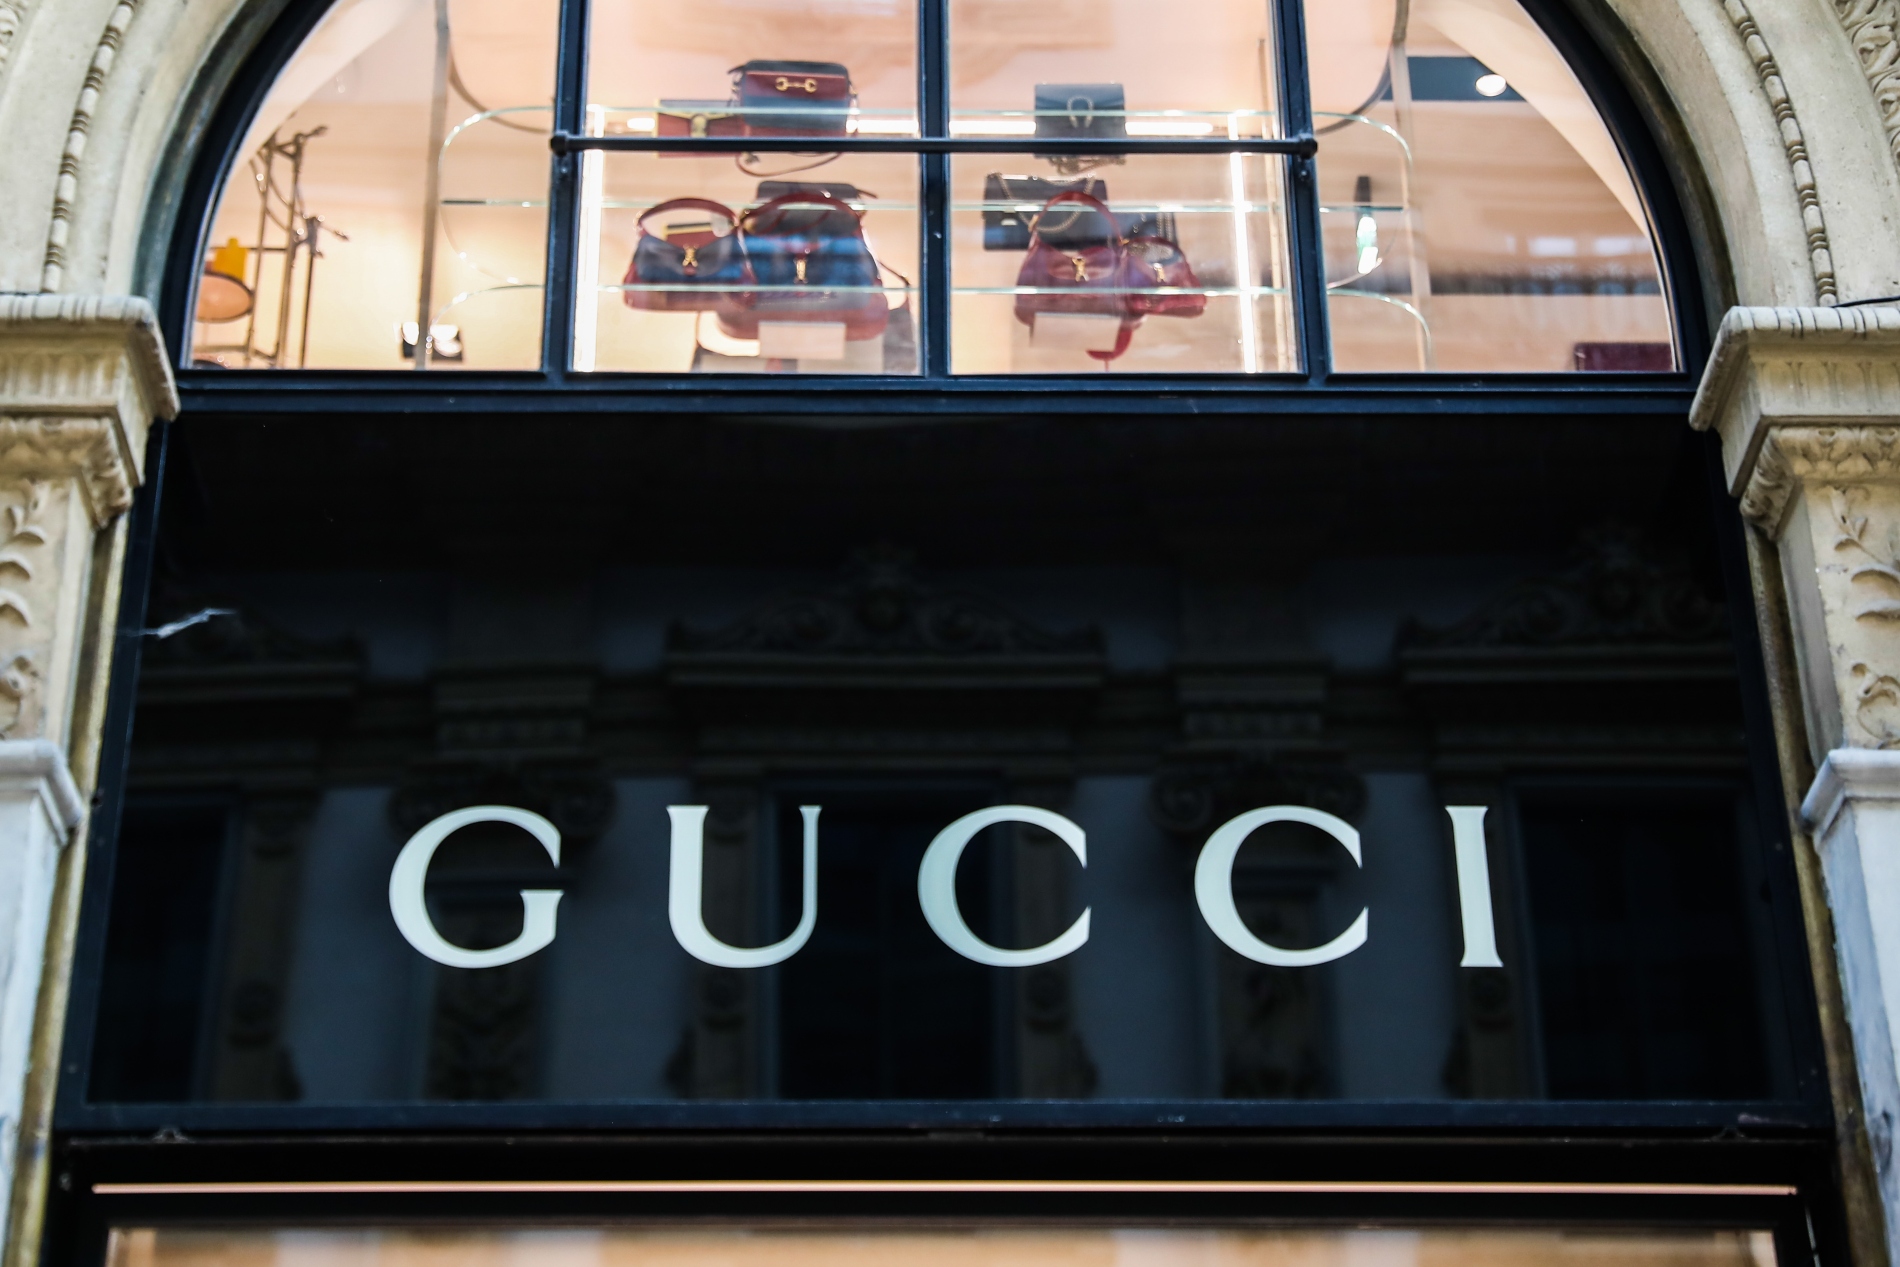 Gucci storefront with logo